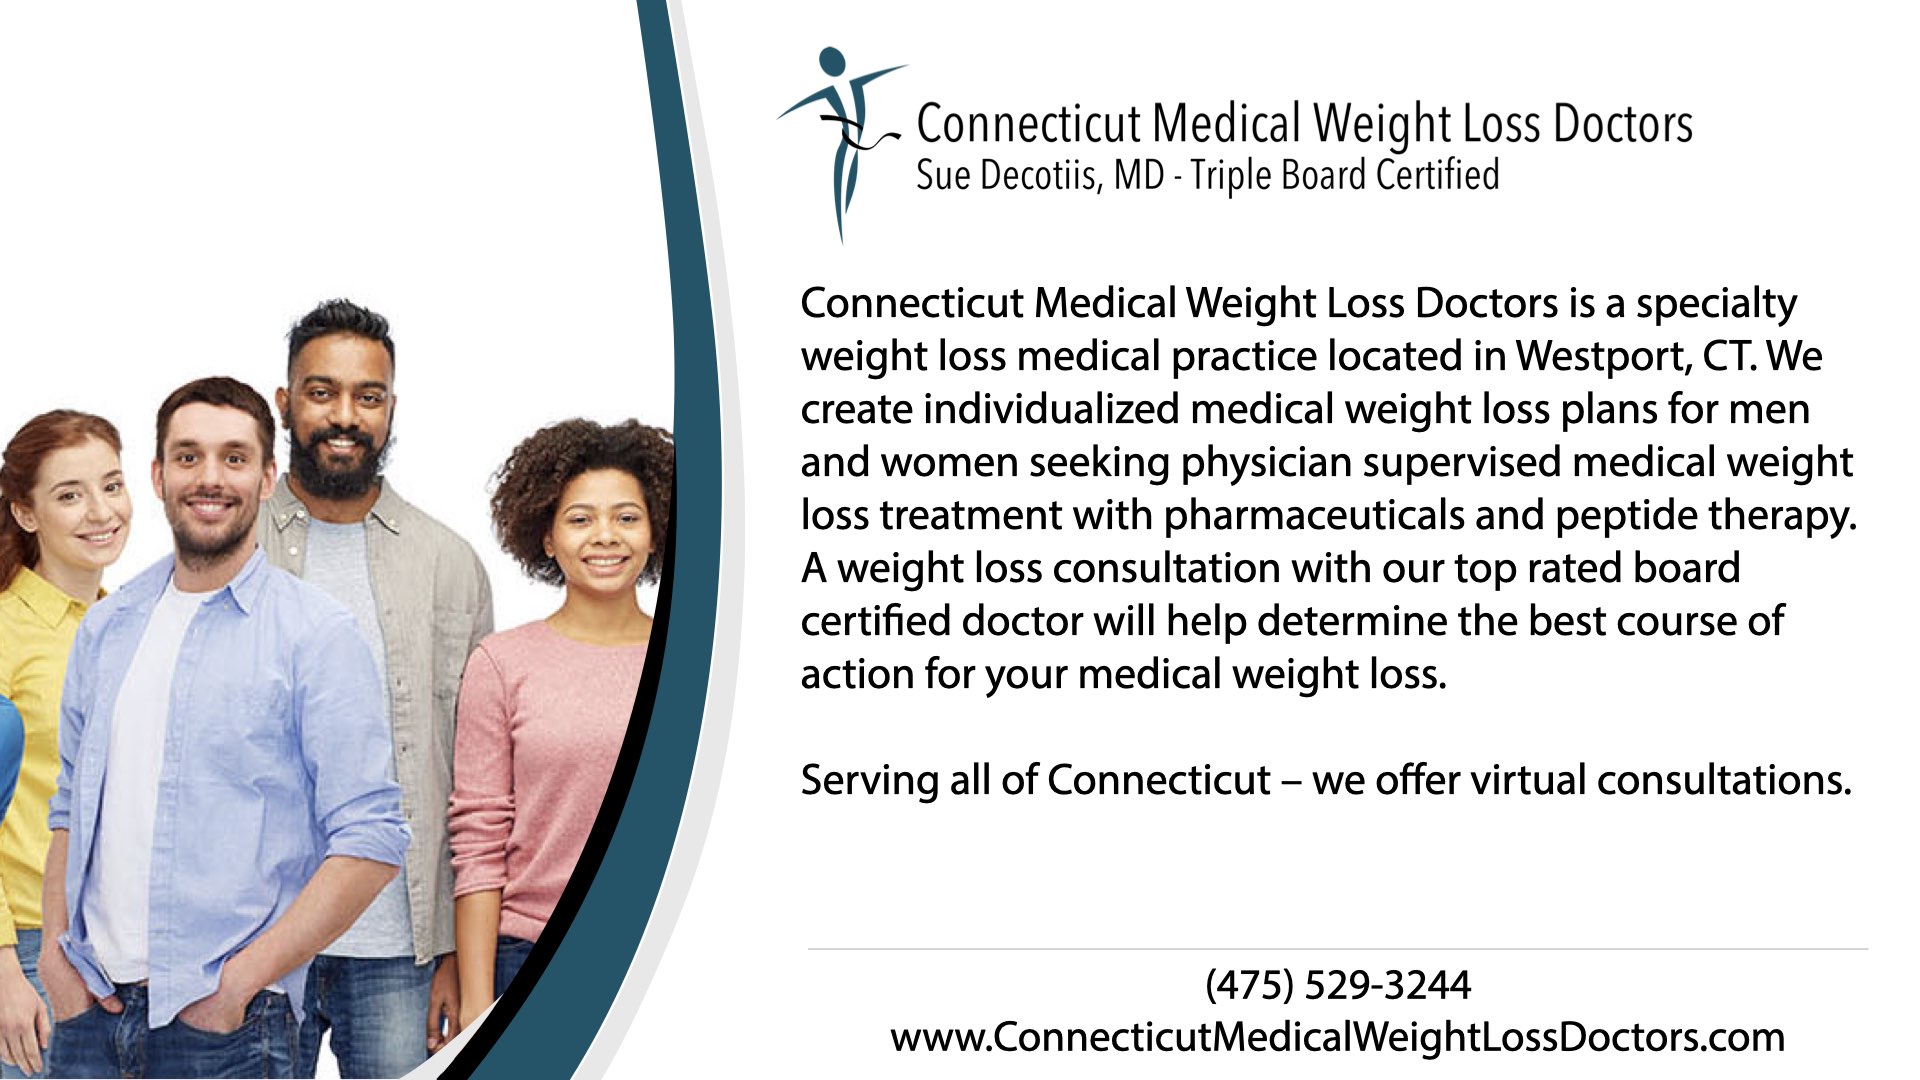 Connecticut Medical Weight Loss Doctors - About Us